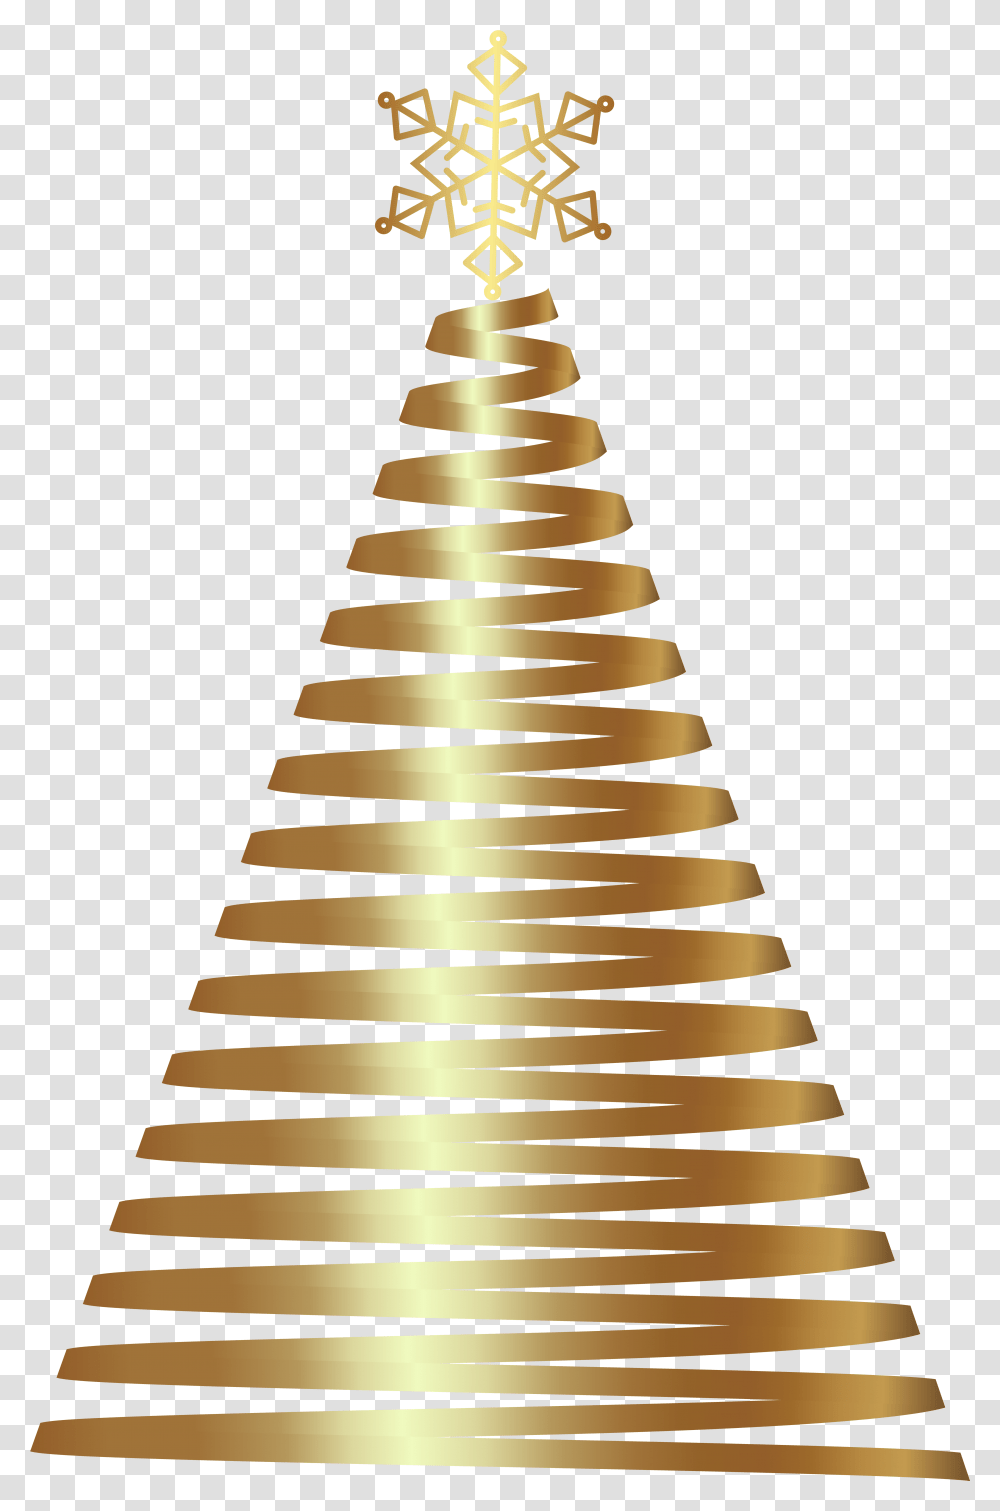 Christmas Ornaments Gold Christmas Tree Gold, Coil, Spiral, Wedding Cake, Dessert Transparent Png